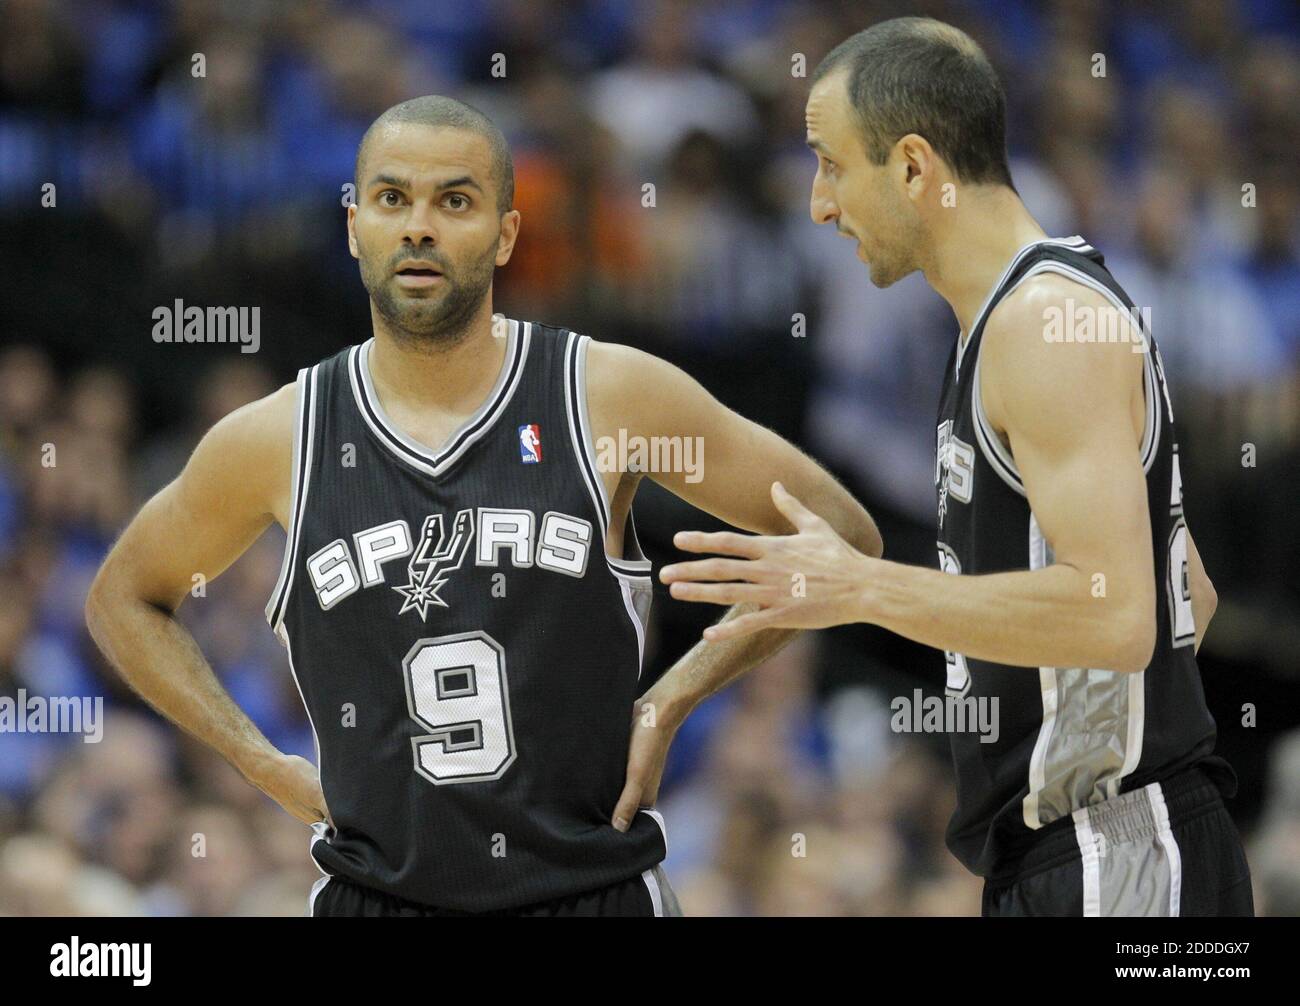 NO FILM, NO VIDEO, NO TV, NO DOCUMENTARY - San Antonio Spurs Tony Parker (9) and Manu Ginobili (20) talk during the first half of Game 4 against the Dallas Mavericks, in the NBA Western Conference quarterfinals at the American Airlines Center in Dallas, TX, USA on April 28, 2014. Photo by Ron Jenkins/Fort Worth Star-Telegram/MCT/ABACAPRESS.COM Stock Photo